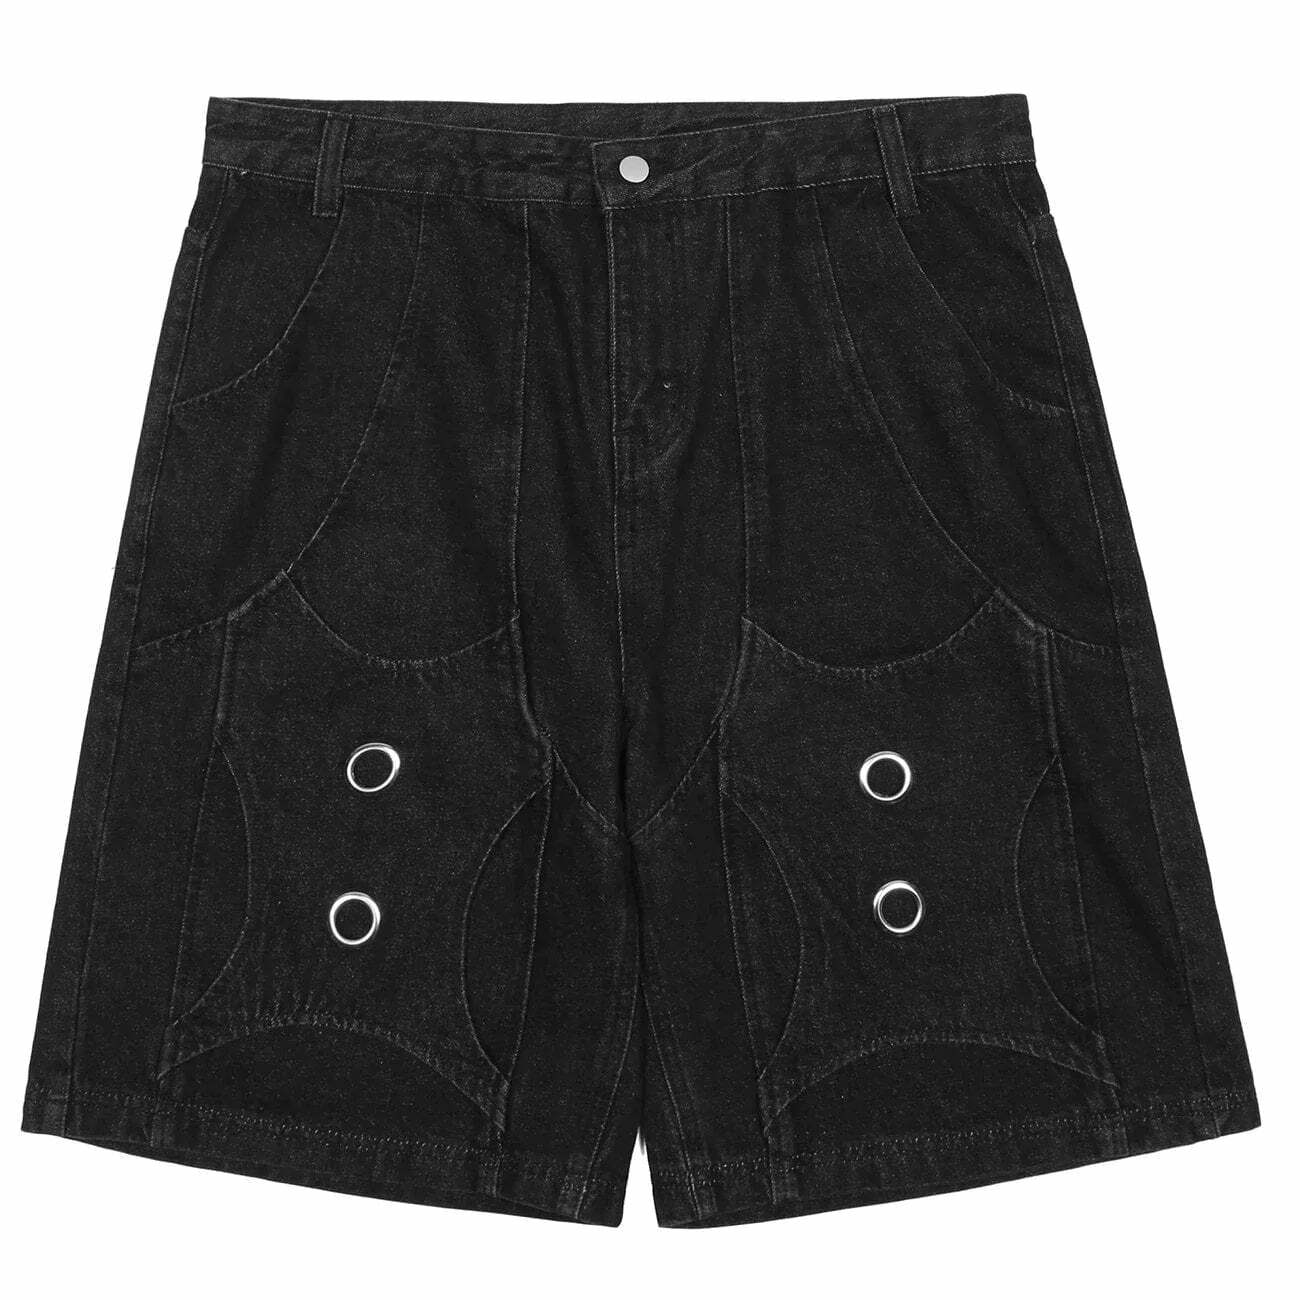 gothic alphabet embroidered shorts edgy & vintage streetwear 7860